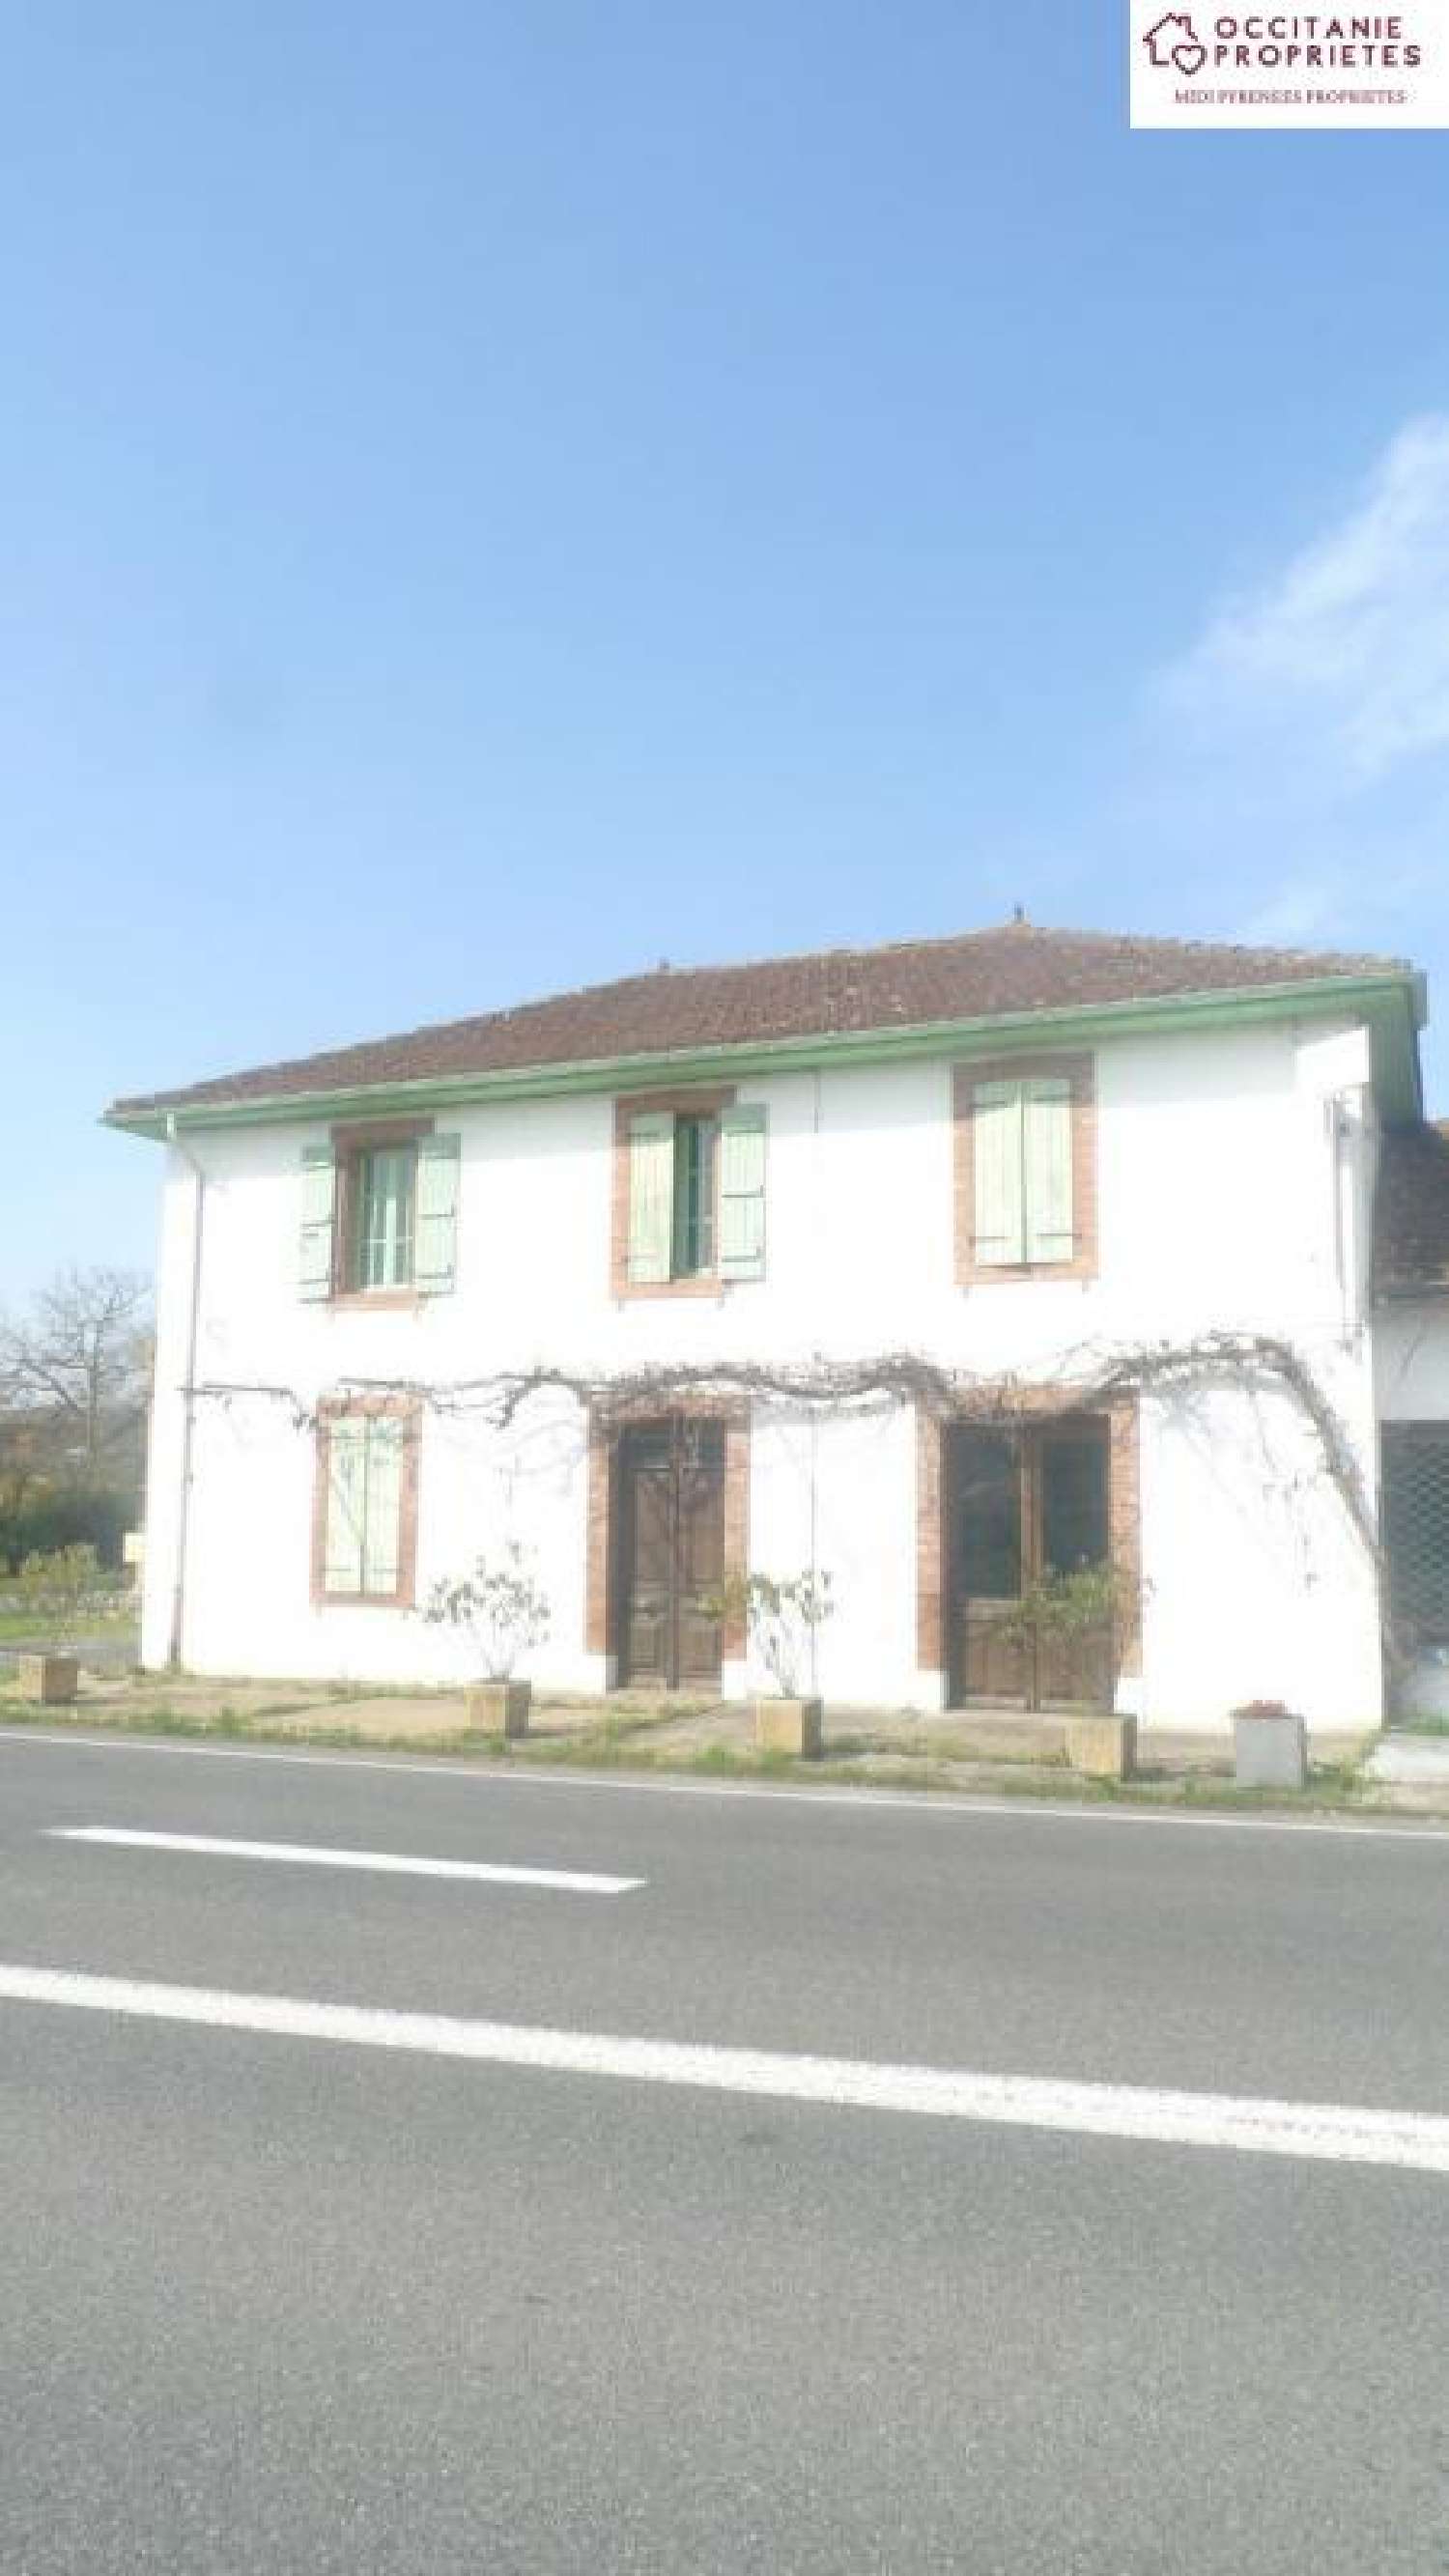  for sale house Masseube Gers 1